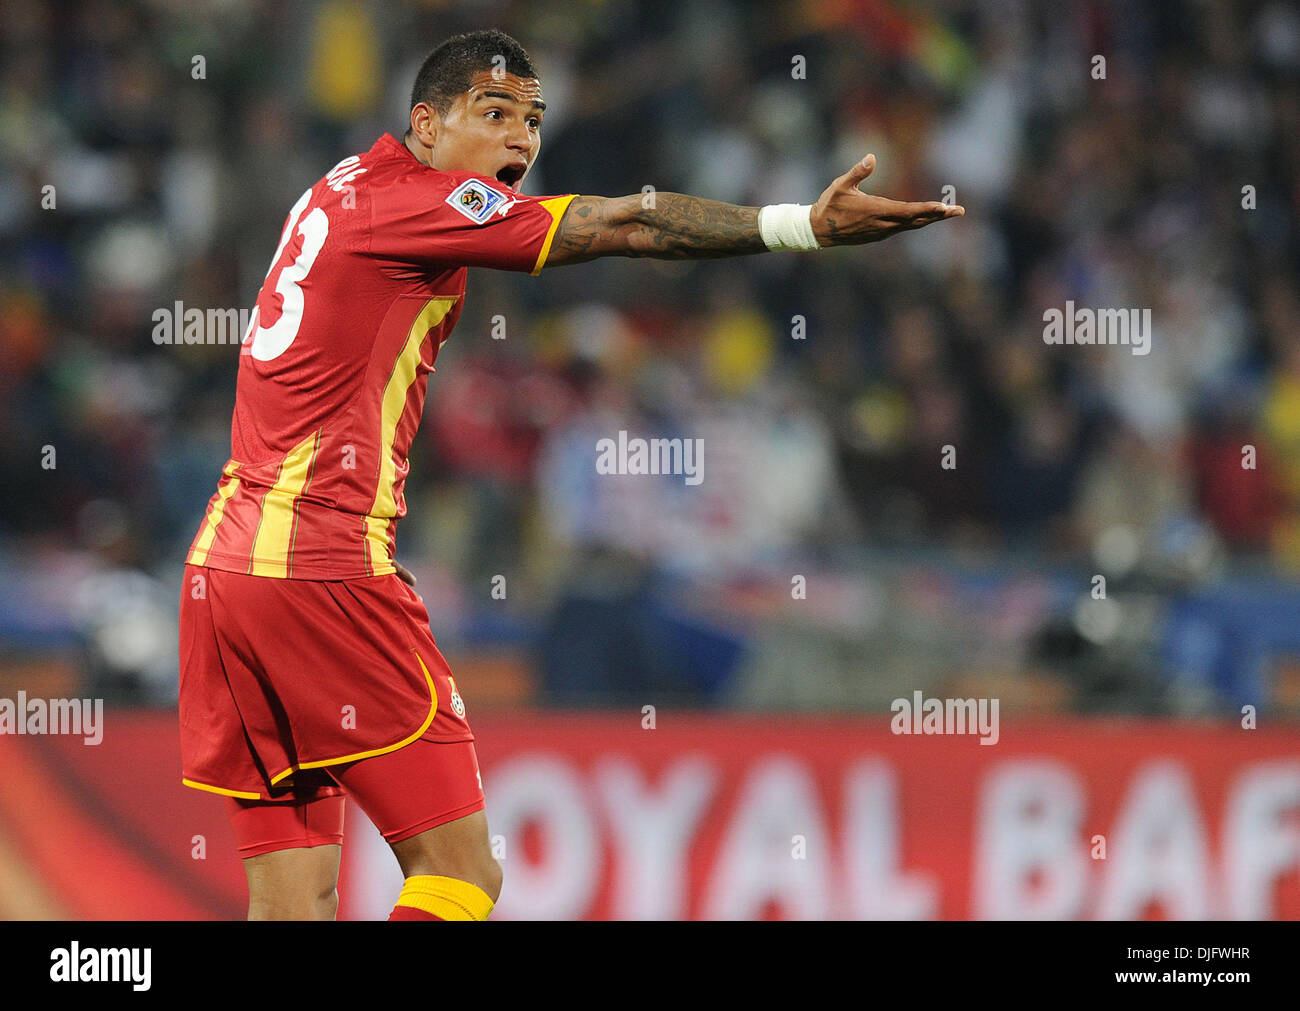 June 26, 2010 - Rustenburg, South Africa - Kevin Prince Boateng of GHANA gestures during the 2010 FIFA World Cup soccer match between USA and Ghana at Royal Bafokeng Stadium on June 26, 2010 in Rustenburg, South Africa. (Credit Image: © Luca Ghidoni/ZUMApress.com) Stock Photo